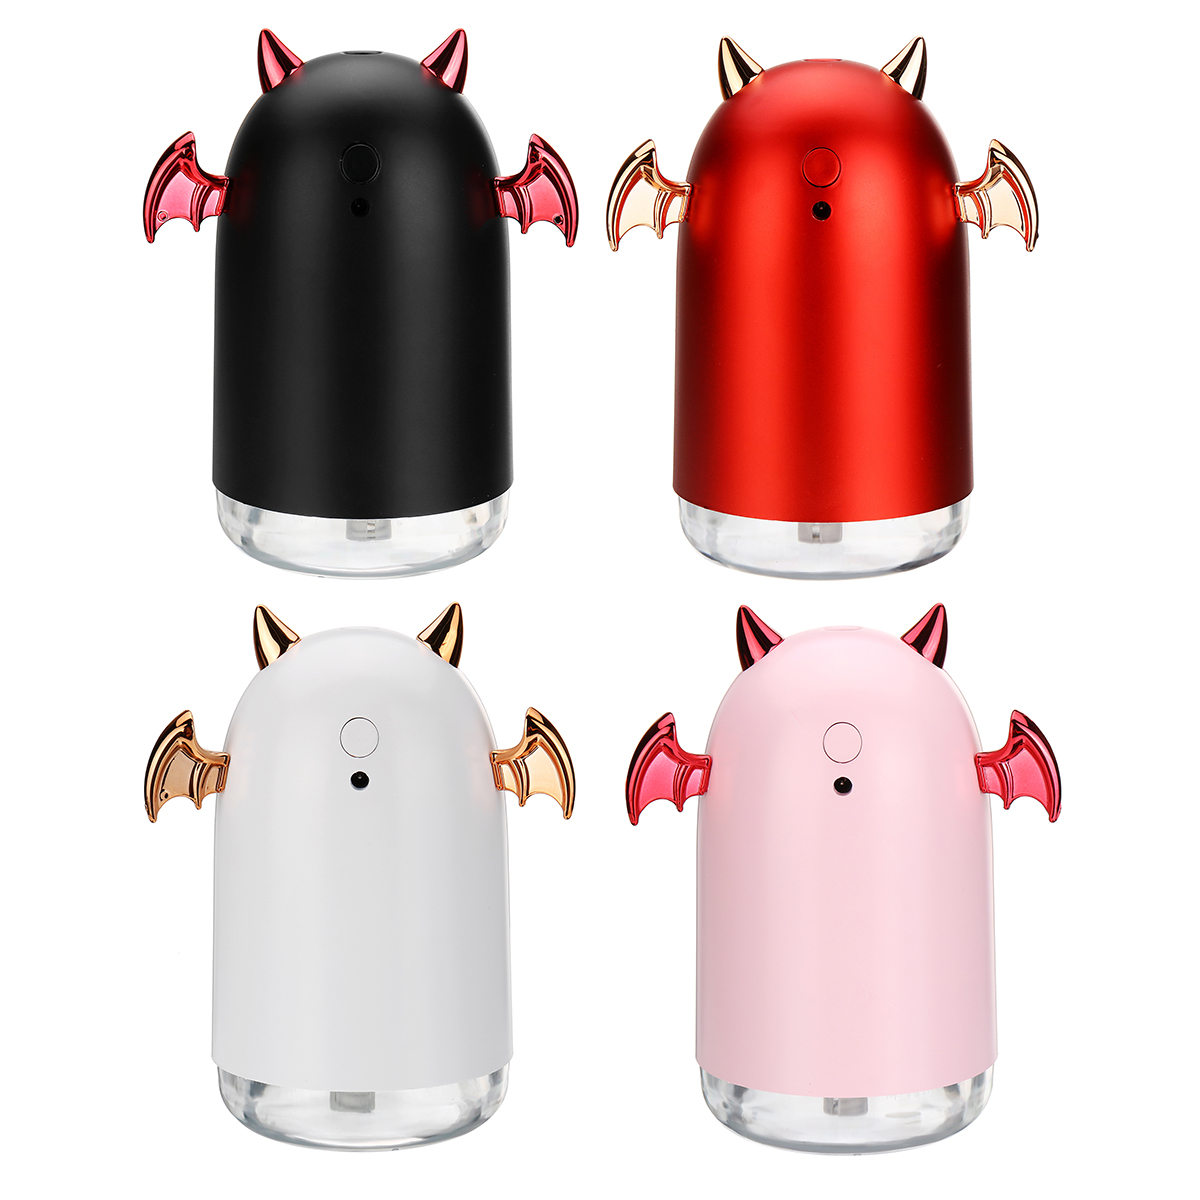 7-LED-Humidifier-USB-Purifier-Mist-Aroma-Essential-Oil-Diffuser-Halloween-Gift-1651094-2